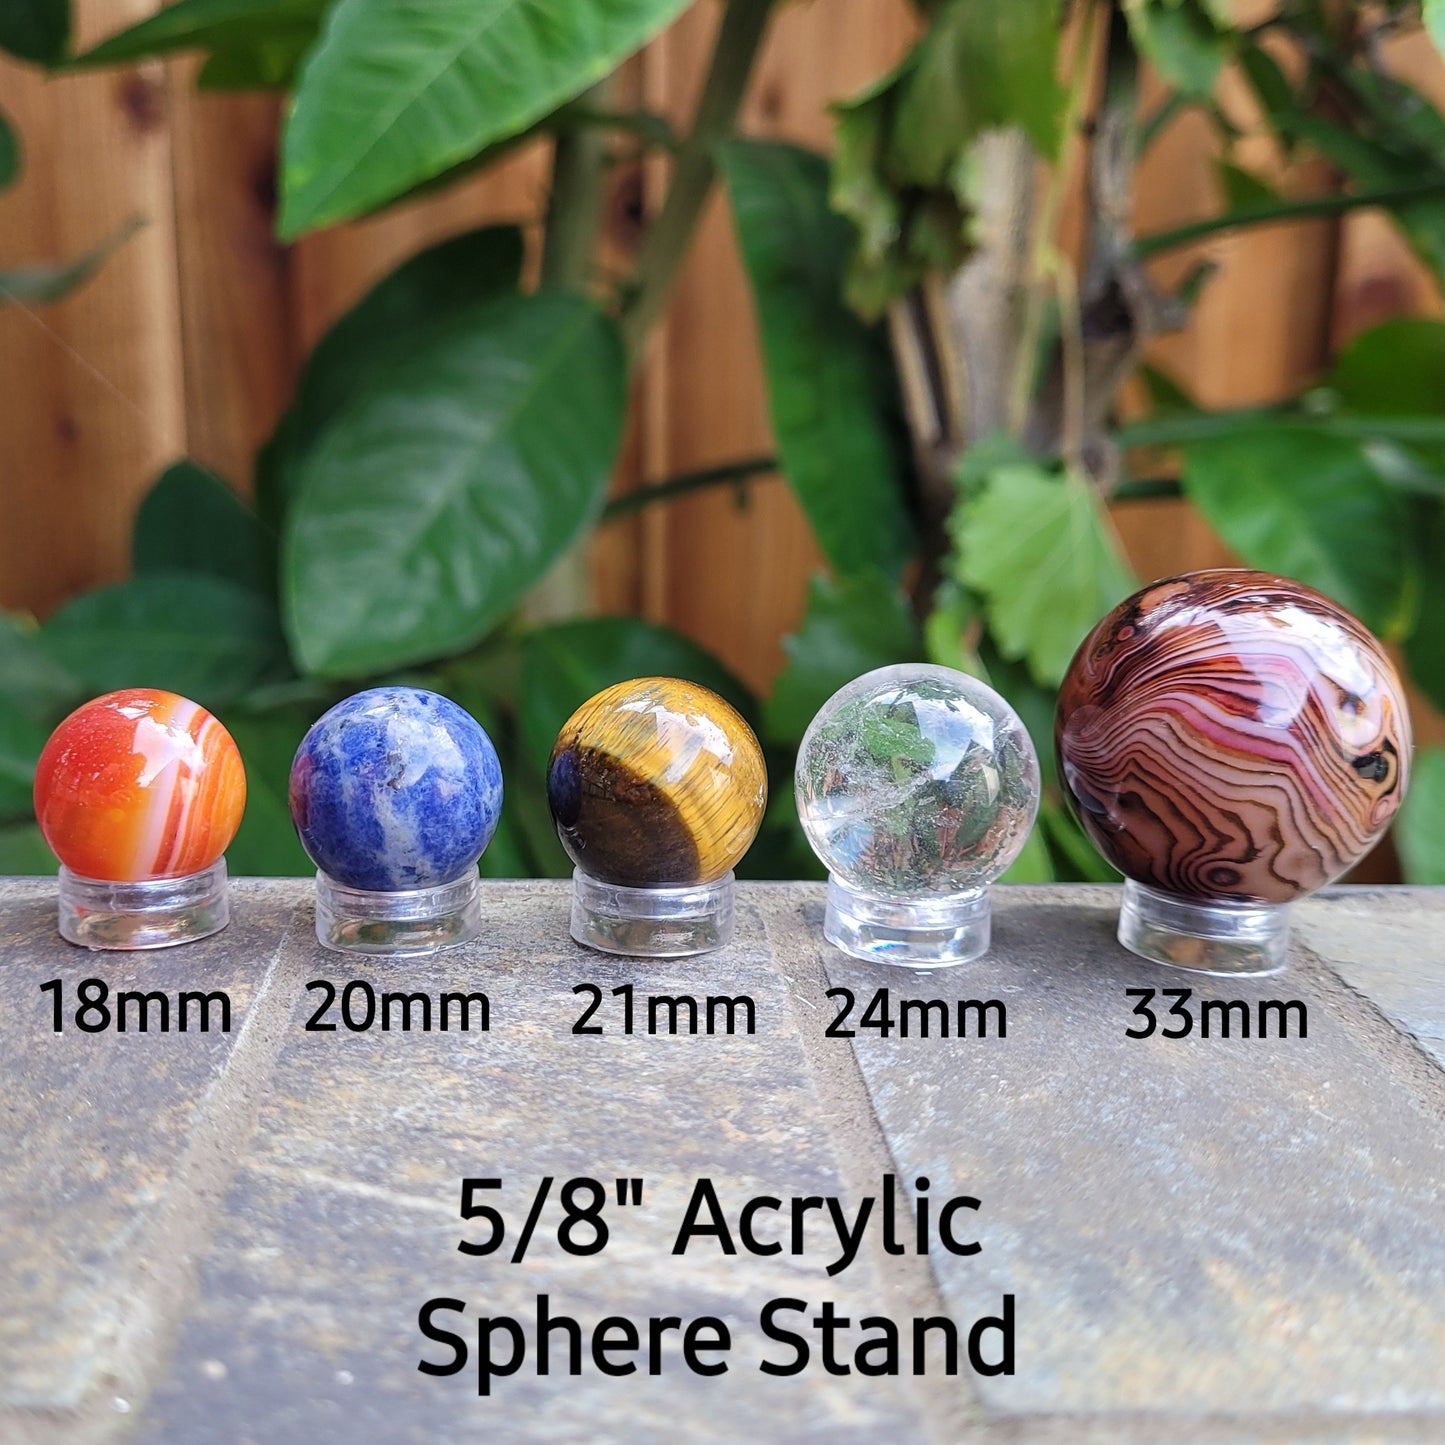 Clear Acrylic Sphere Display Stands, for Crystal Balls or Eggs 0.6" to 5.5" (15mm to 140mm)